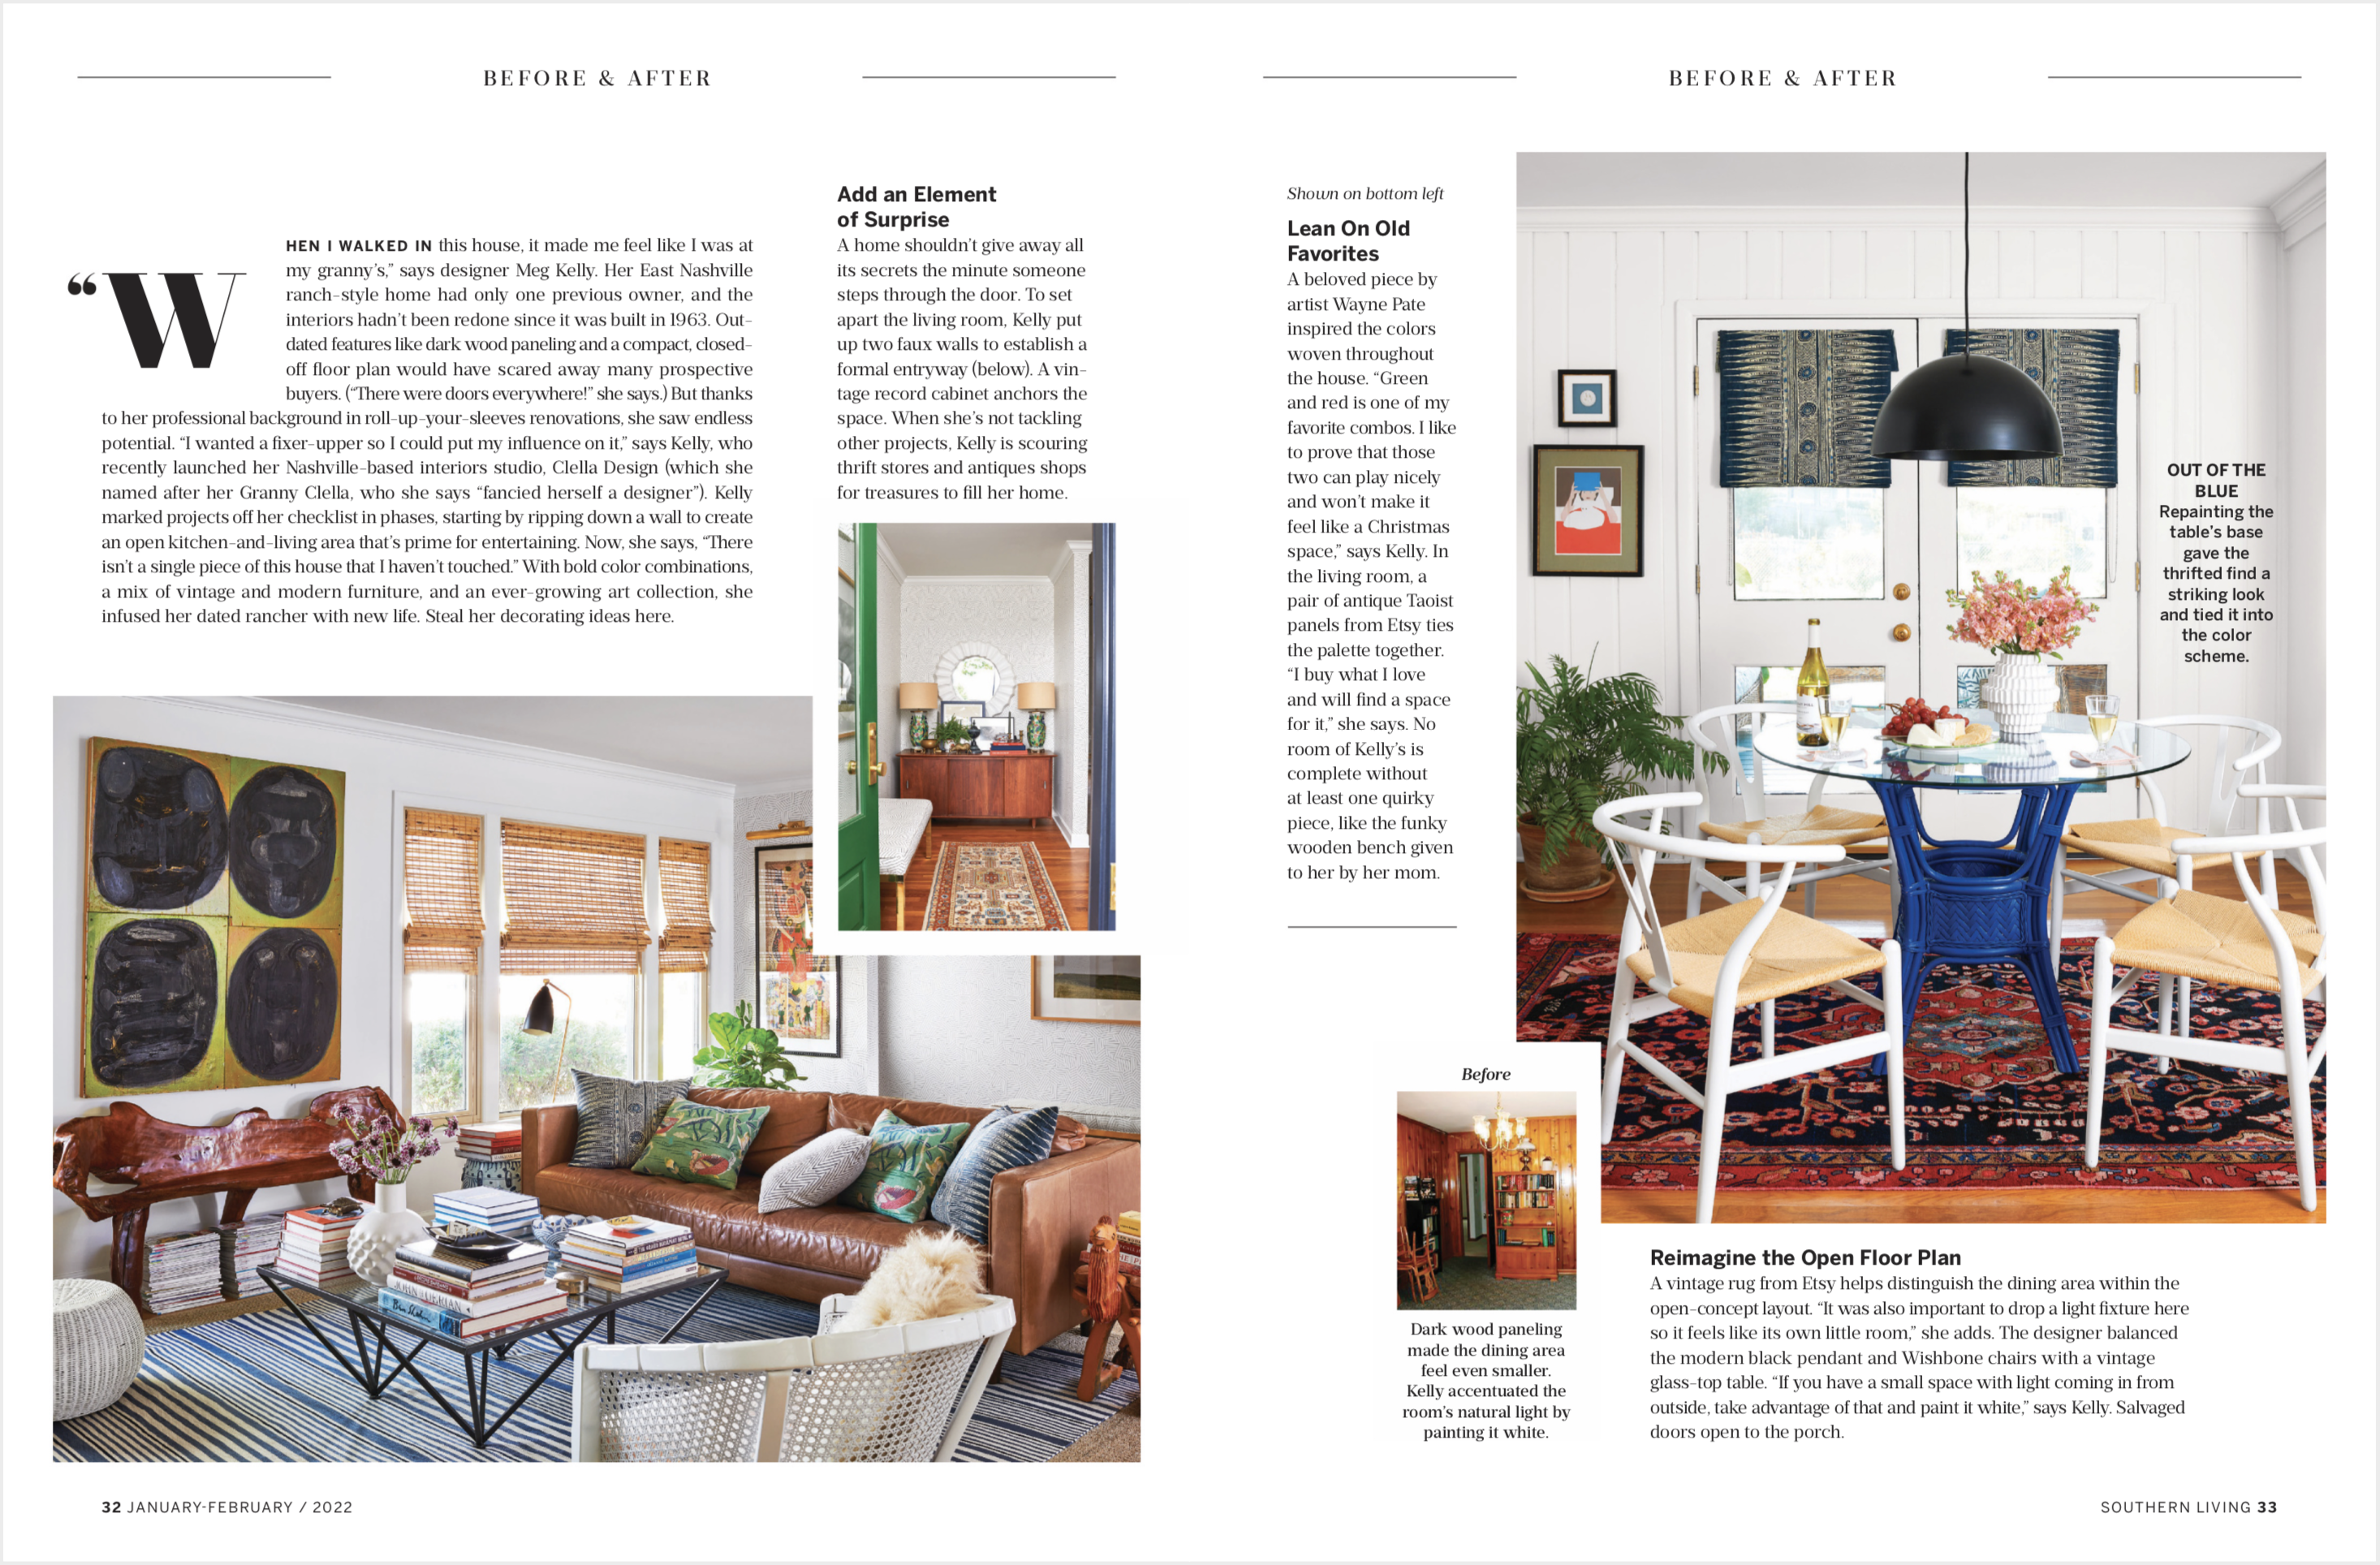 Southern Living Magazine spread 2 of Meg Kelly  by Alison Gootee photography